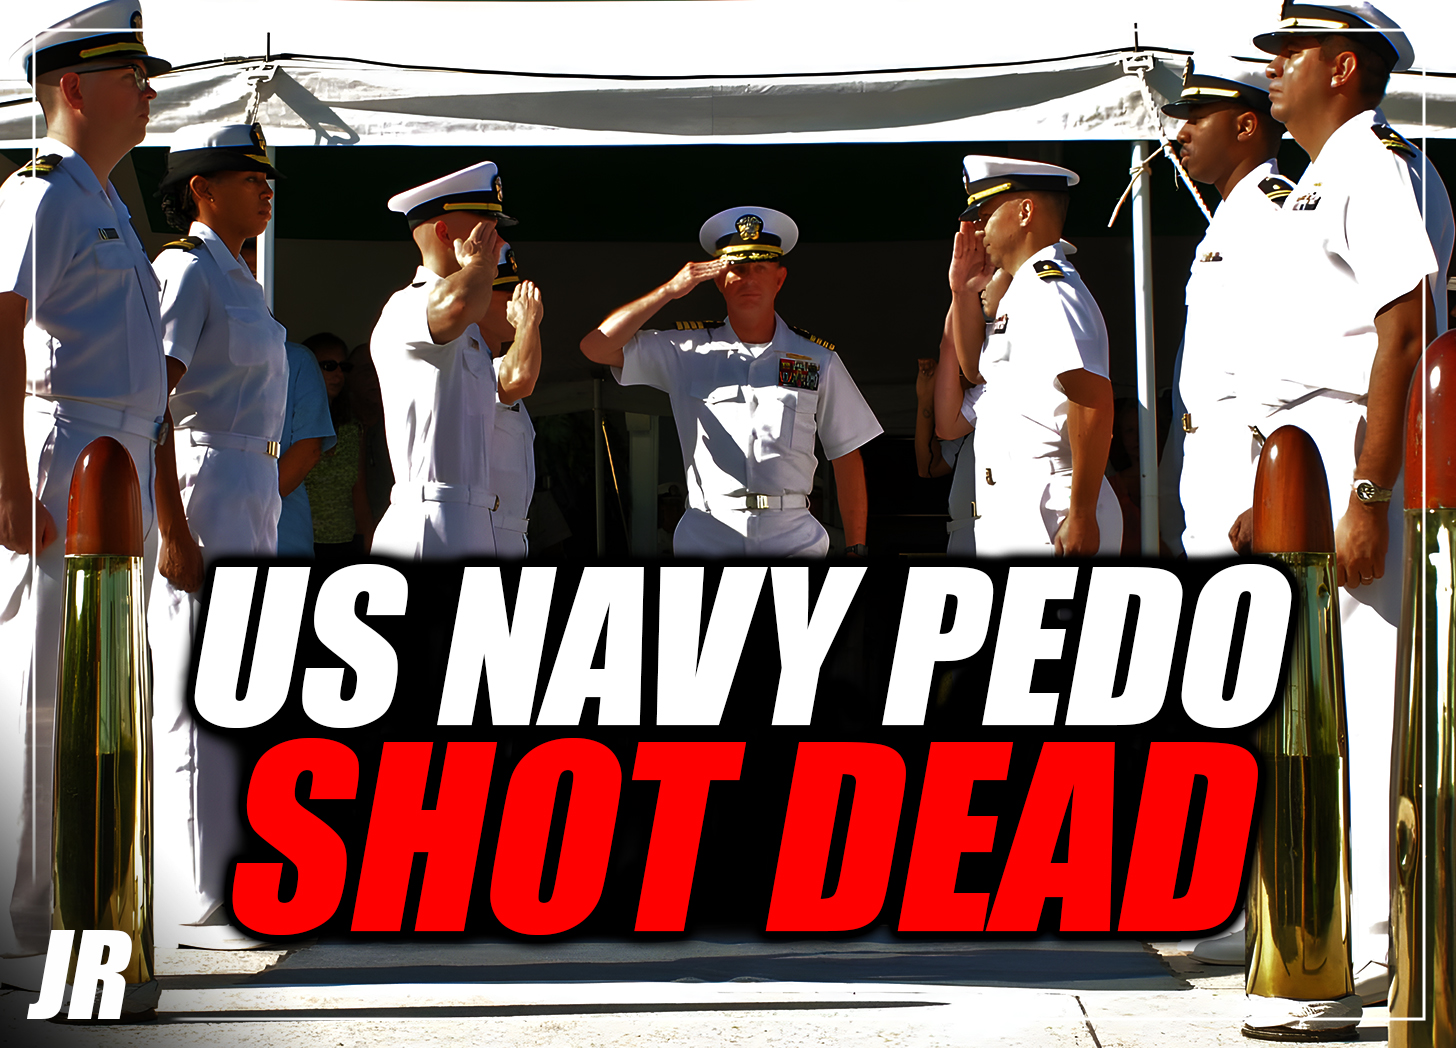 High-ranking US Navy commander shot dead in undercover pedophile sting